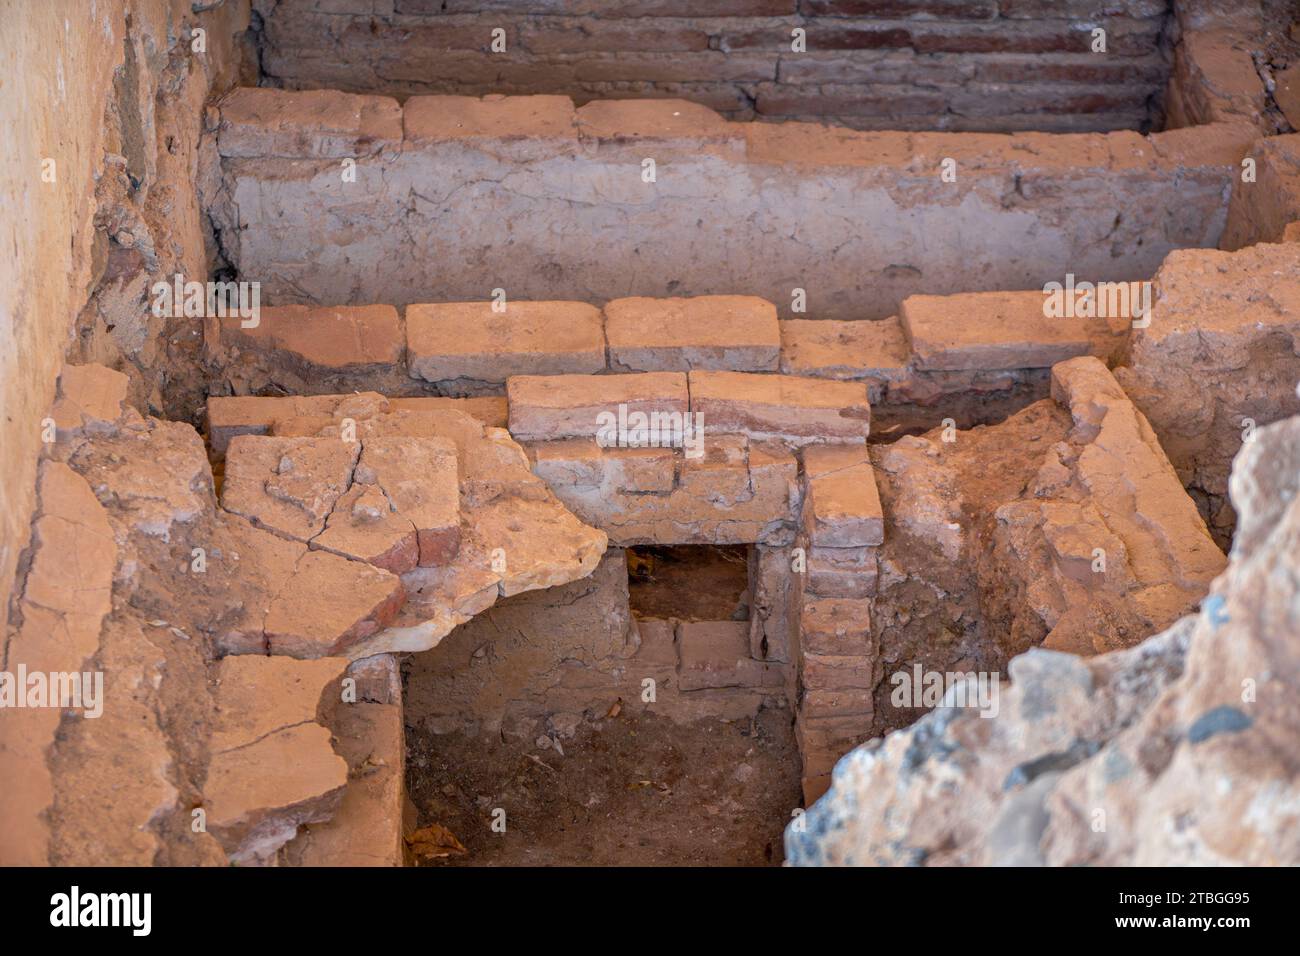 Ancient Roman ruins eroded from rooms and hallway walls of the Merida Casa Mithraeum archaeological complex in Merida, Spain. Stock Photo